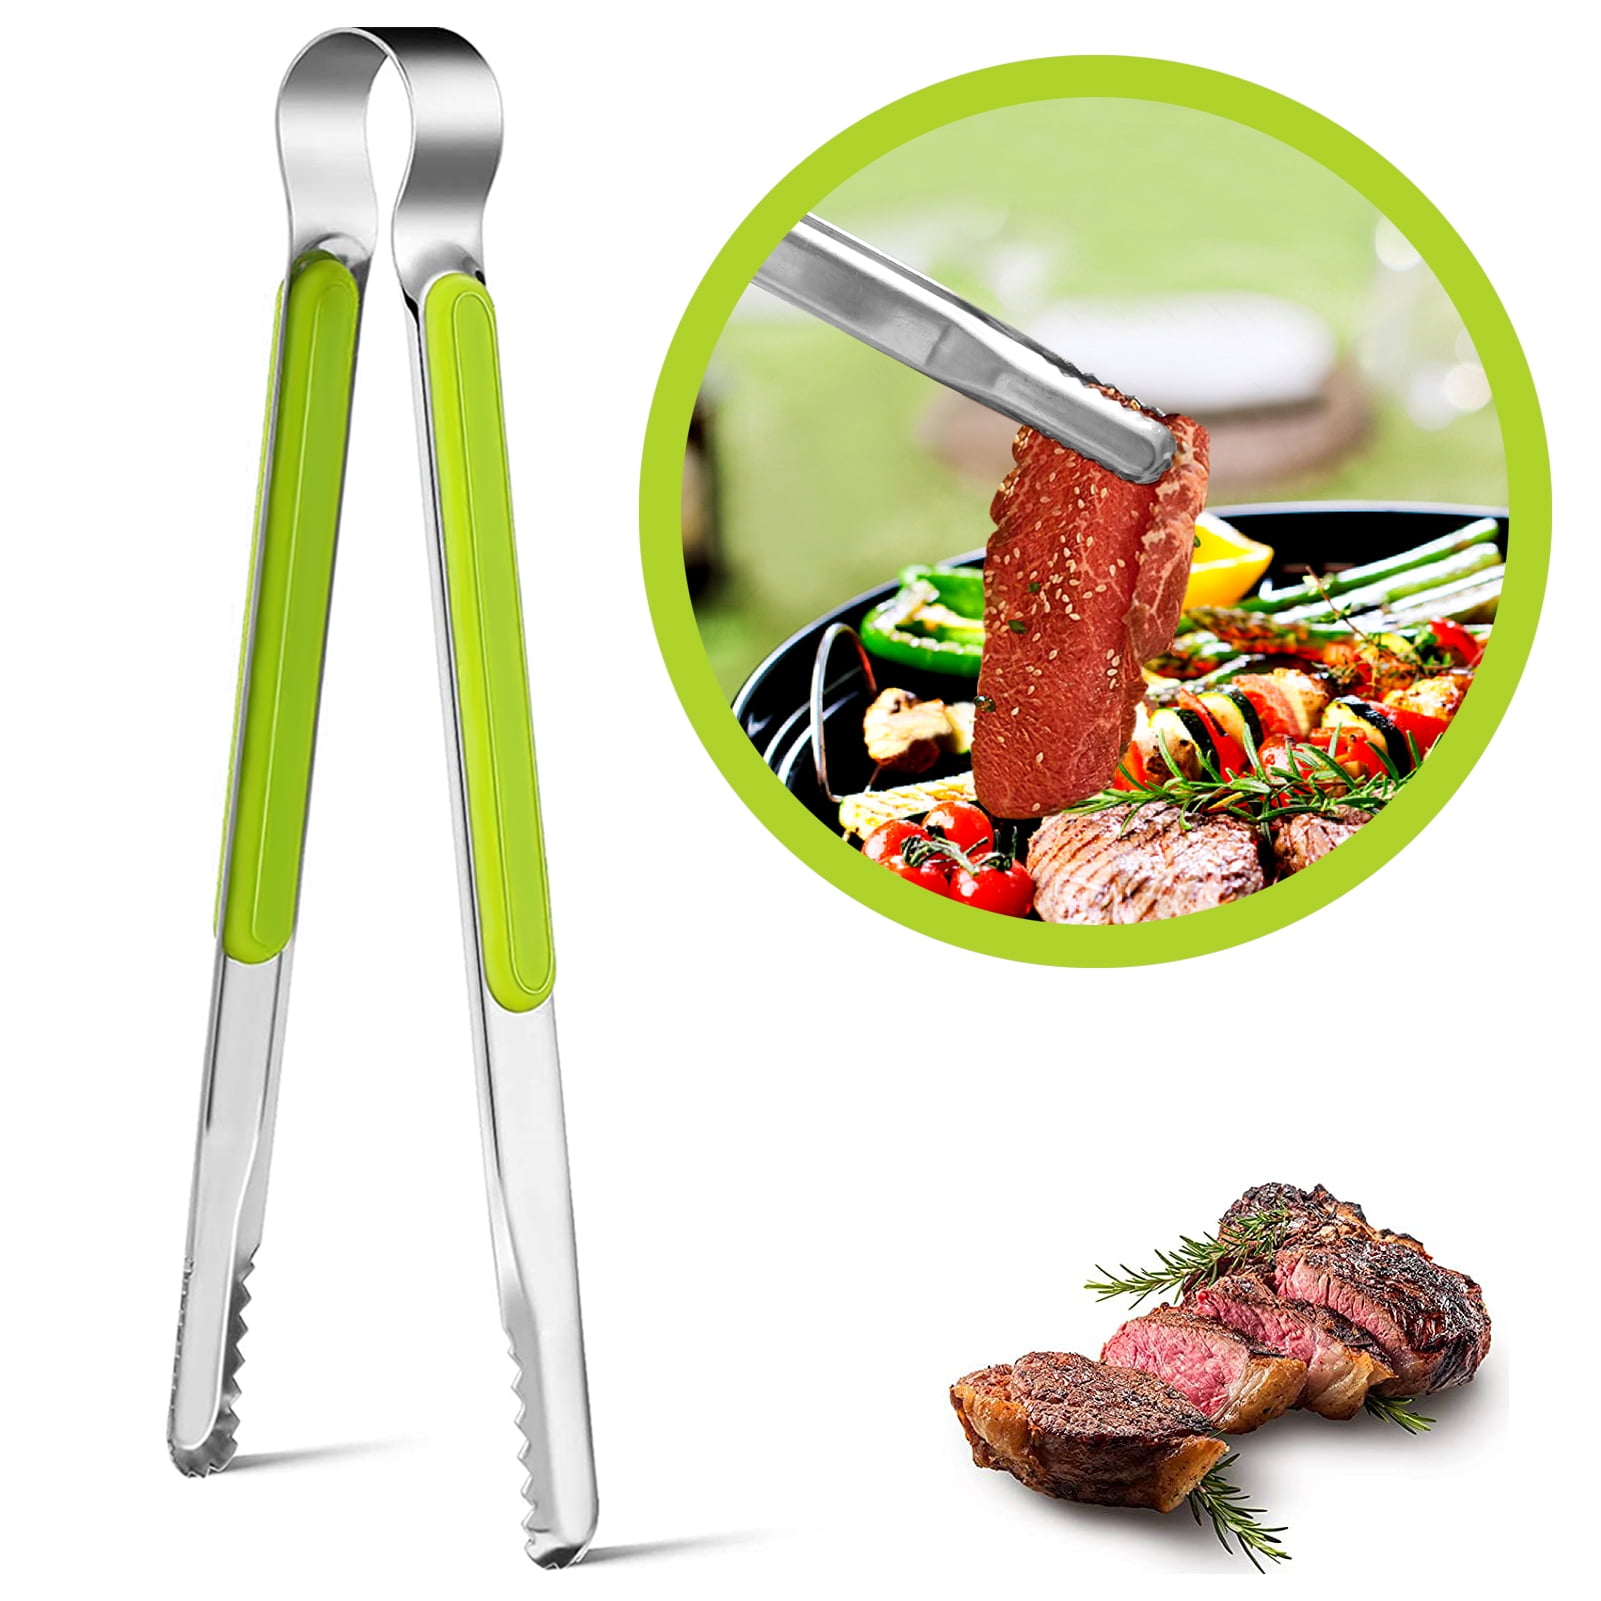 Ggomi Korean Barbecue Kalbi Rib Meat Cutting Shears/Serrated 3T  Blade/Quality Stainless Steel Scissors Large 10 1/4 Inches